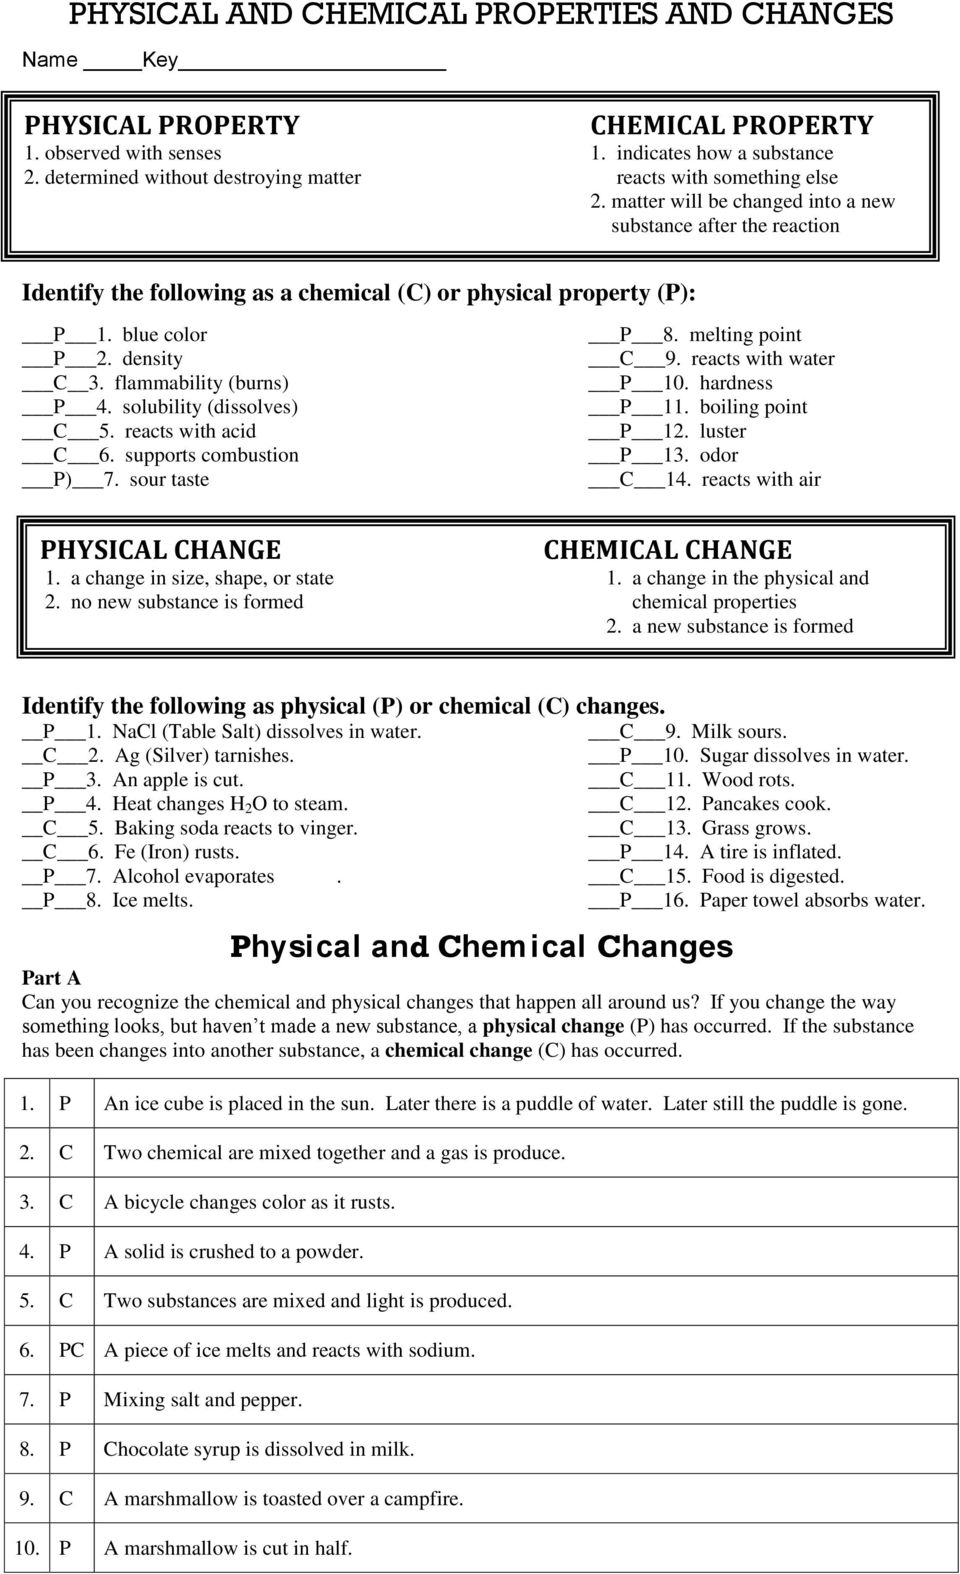 PHYSICAL AND CHEMICAL PROPERTIES AND CHANGES - PDF Free Download With Chemical And Physical Changes Worksheet